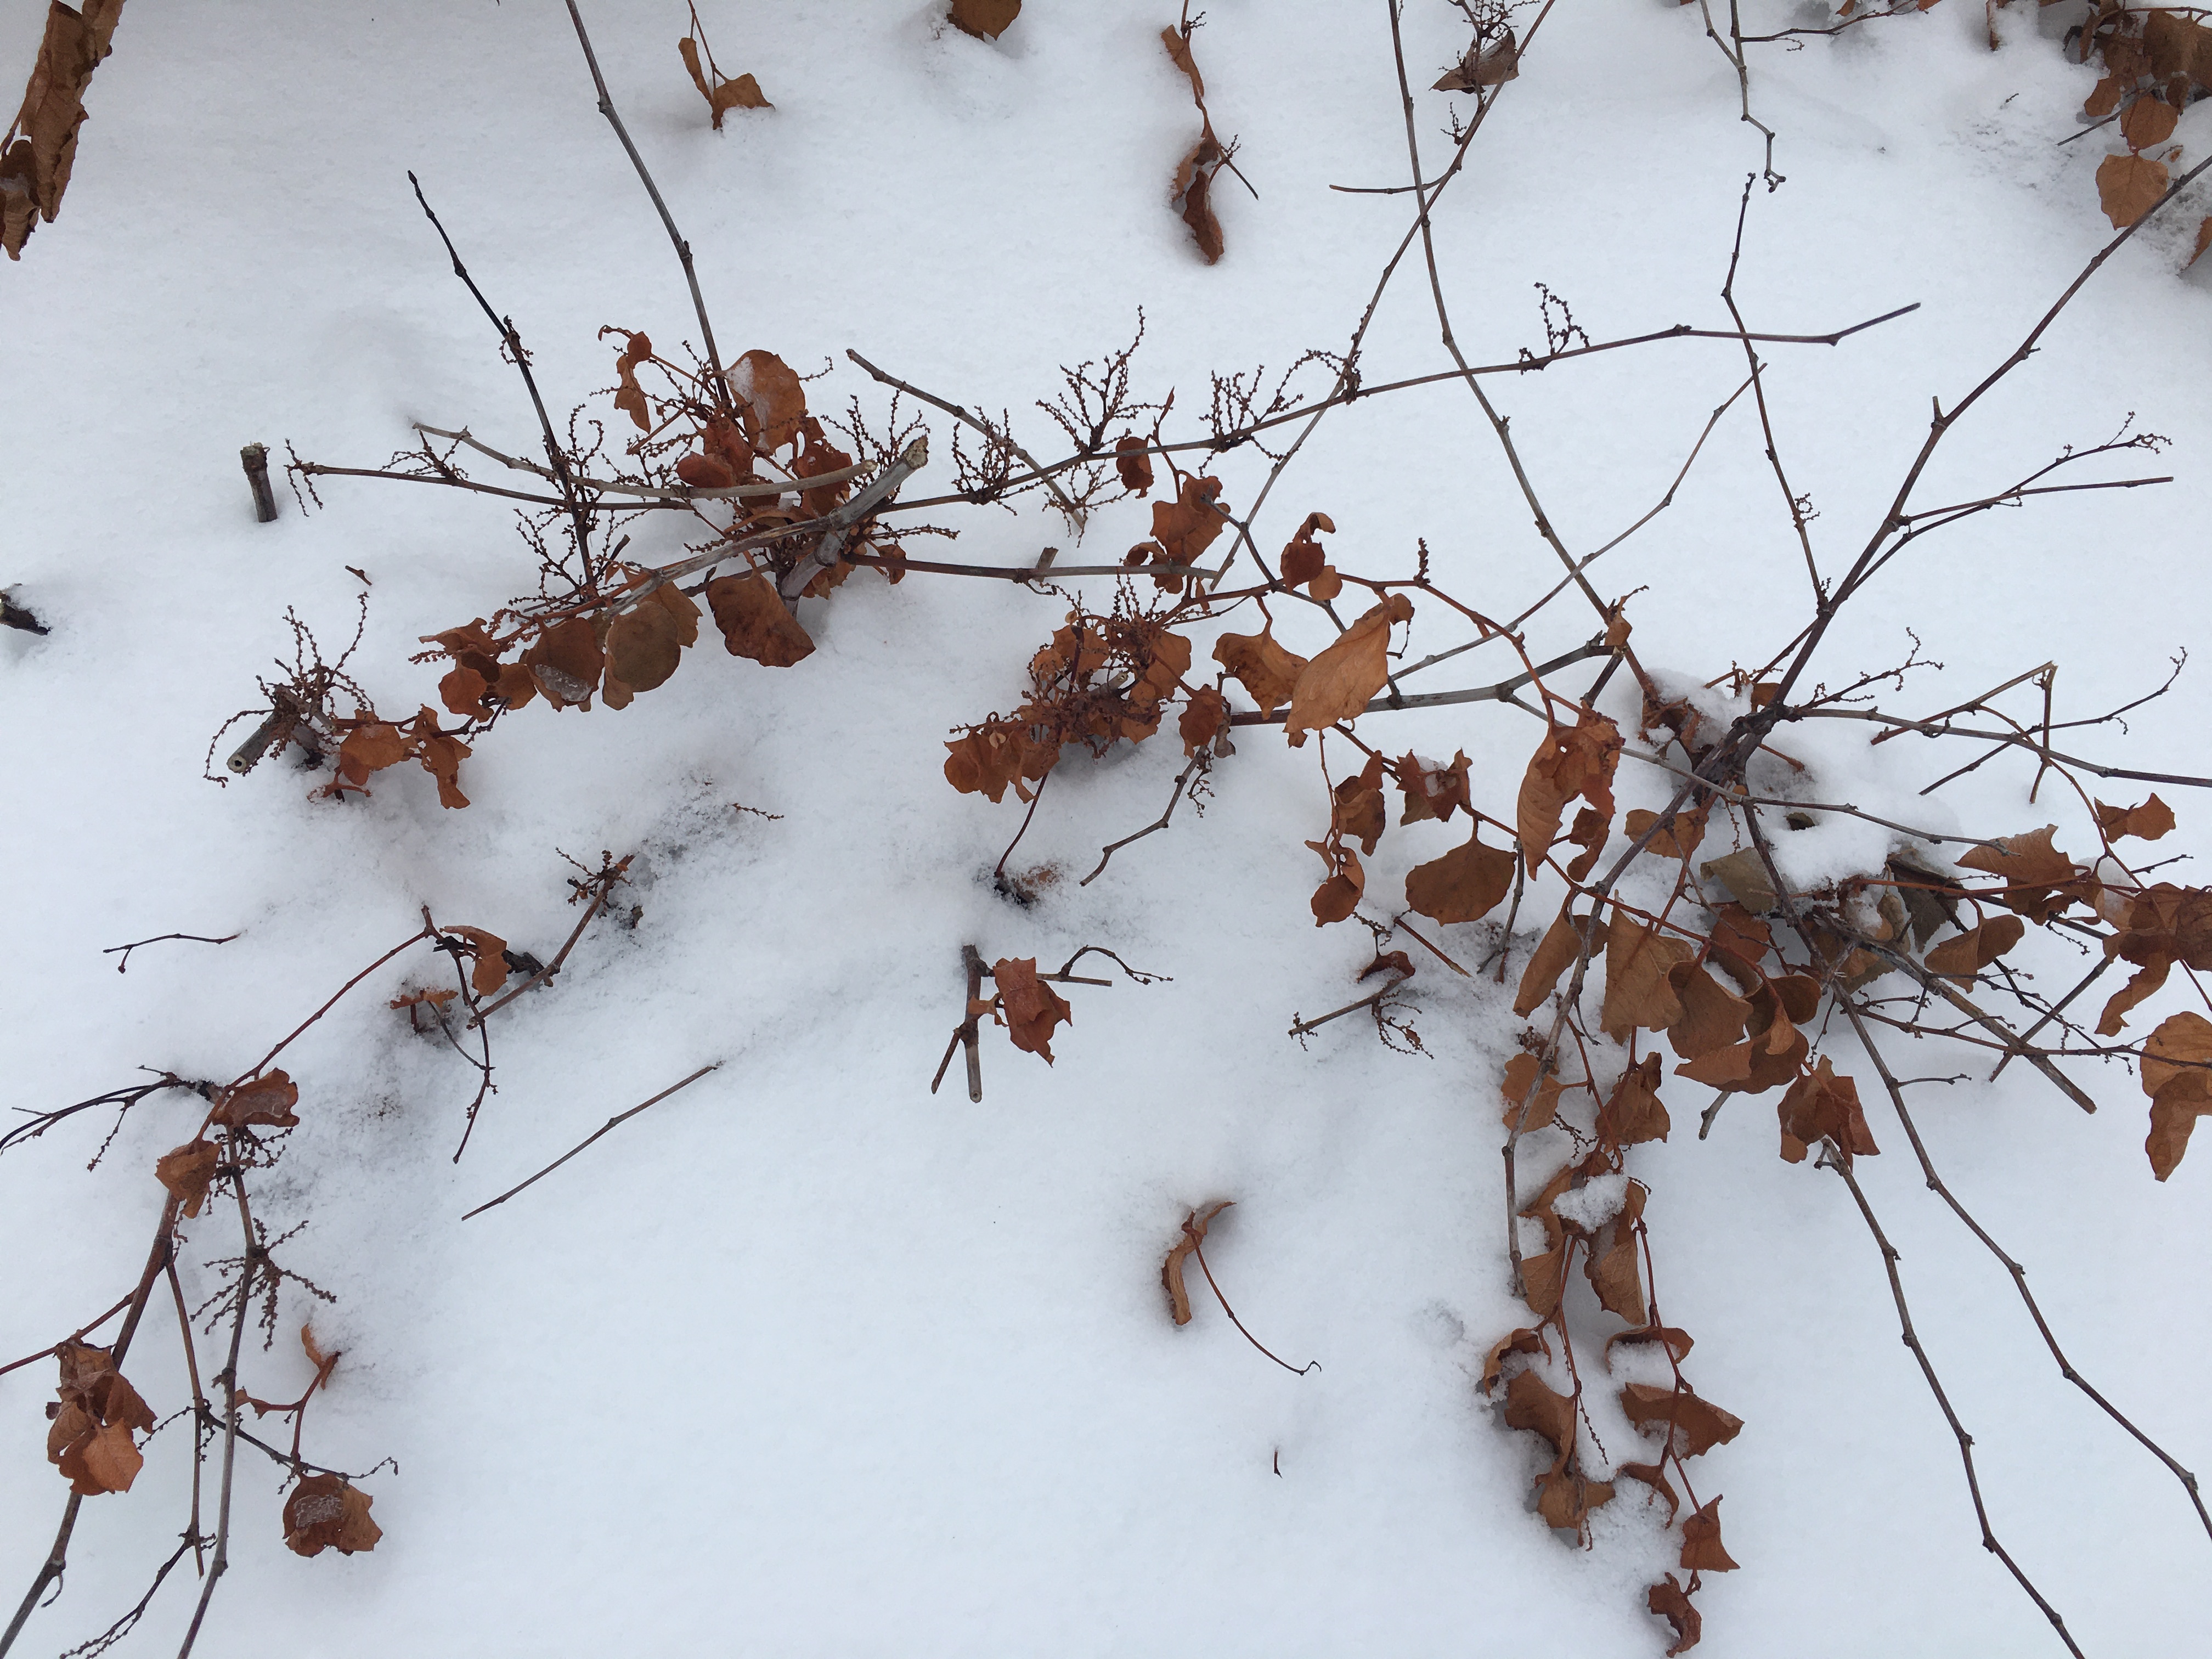 Knotweed (var. compacta) in the snow